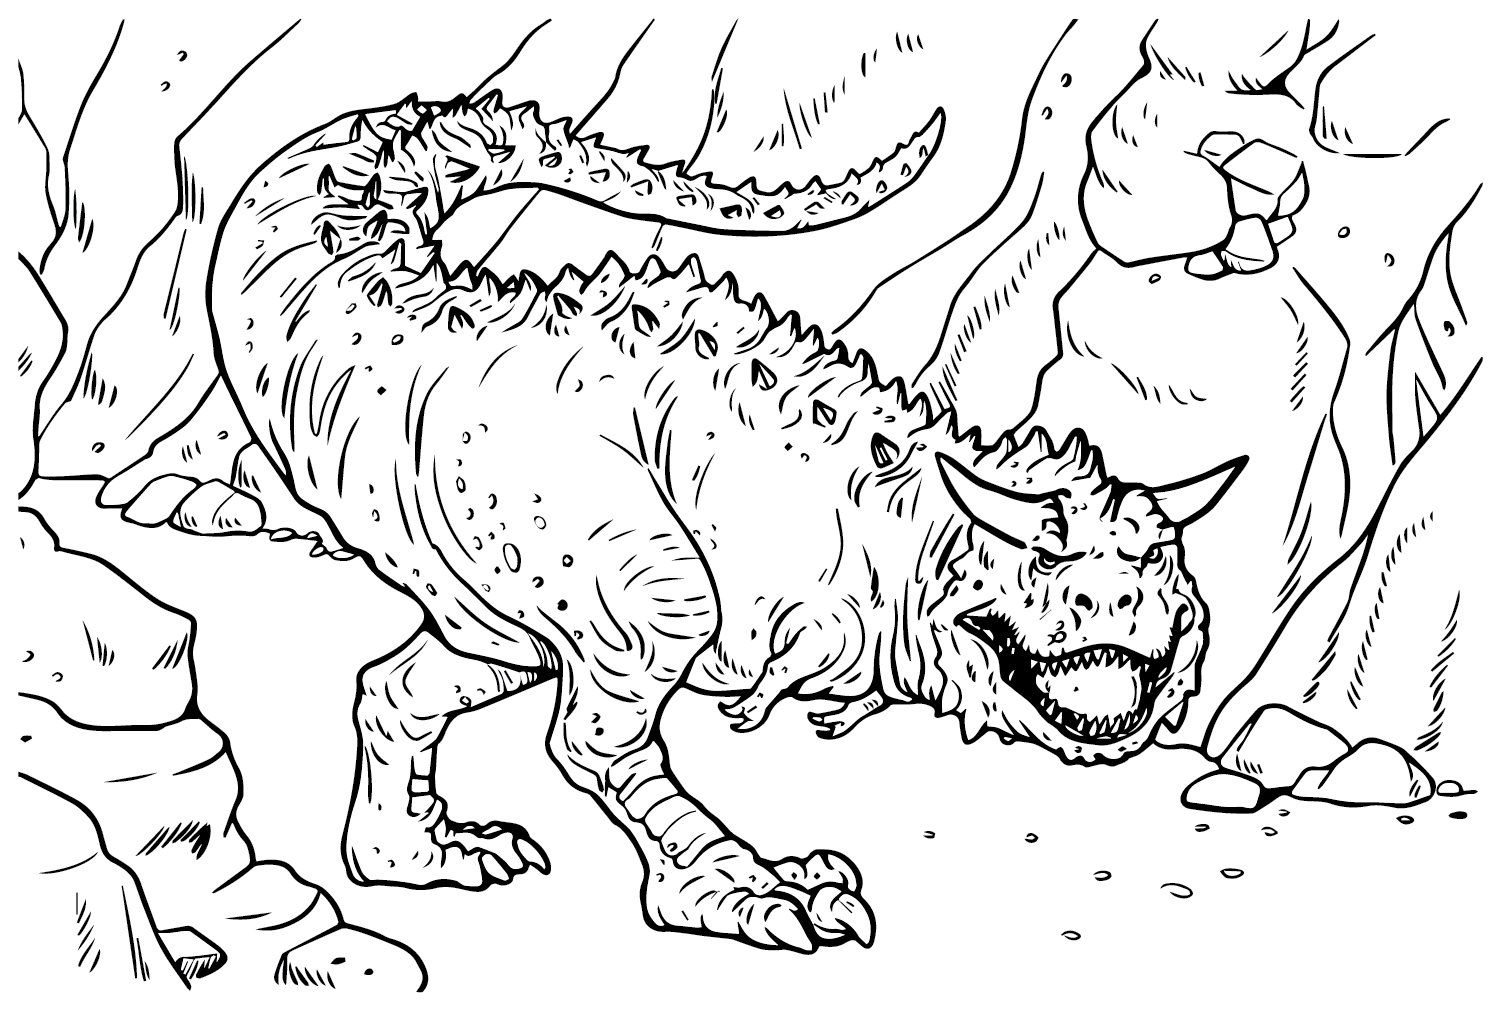 Carnotaurus Coloring Page Printable - Free Printable Coloring Pages